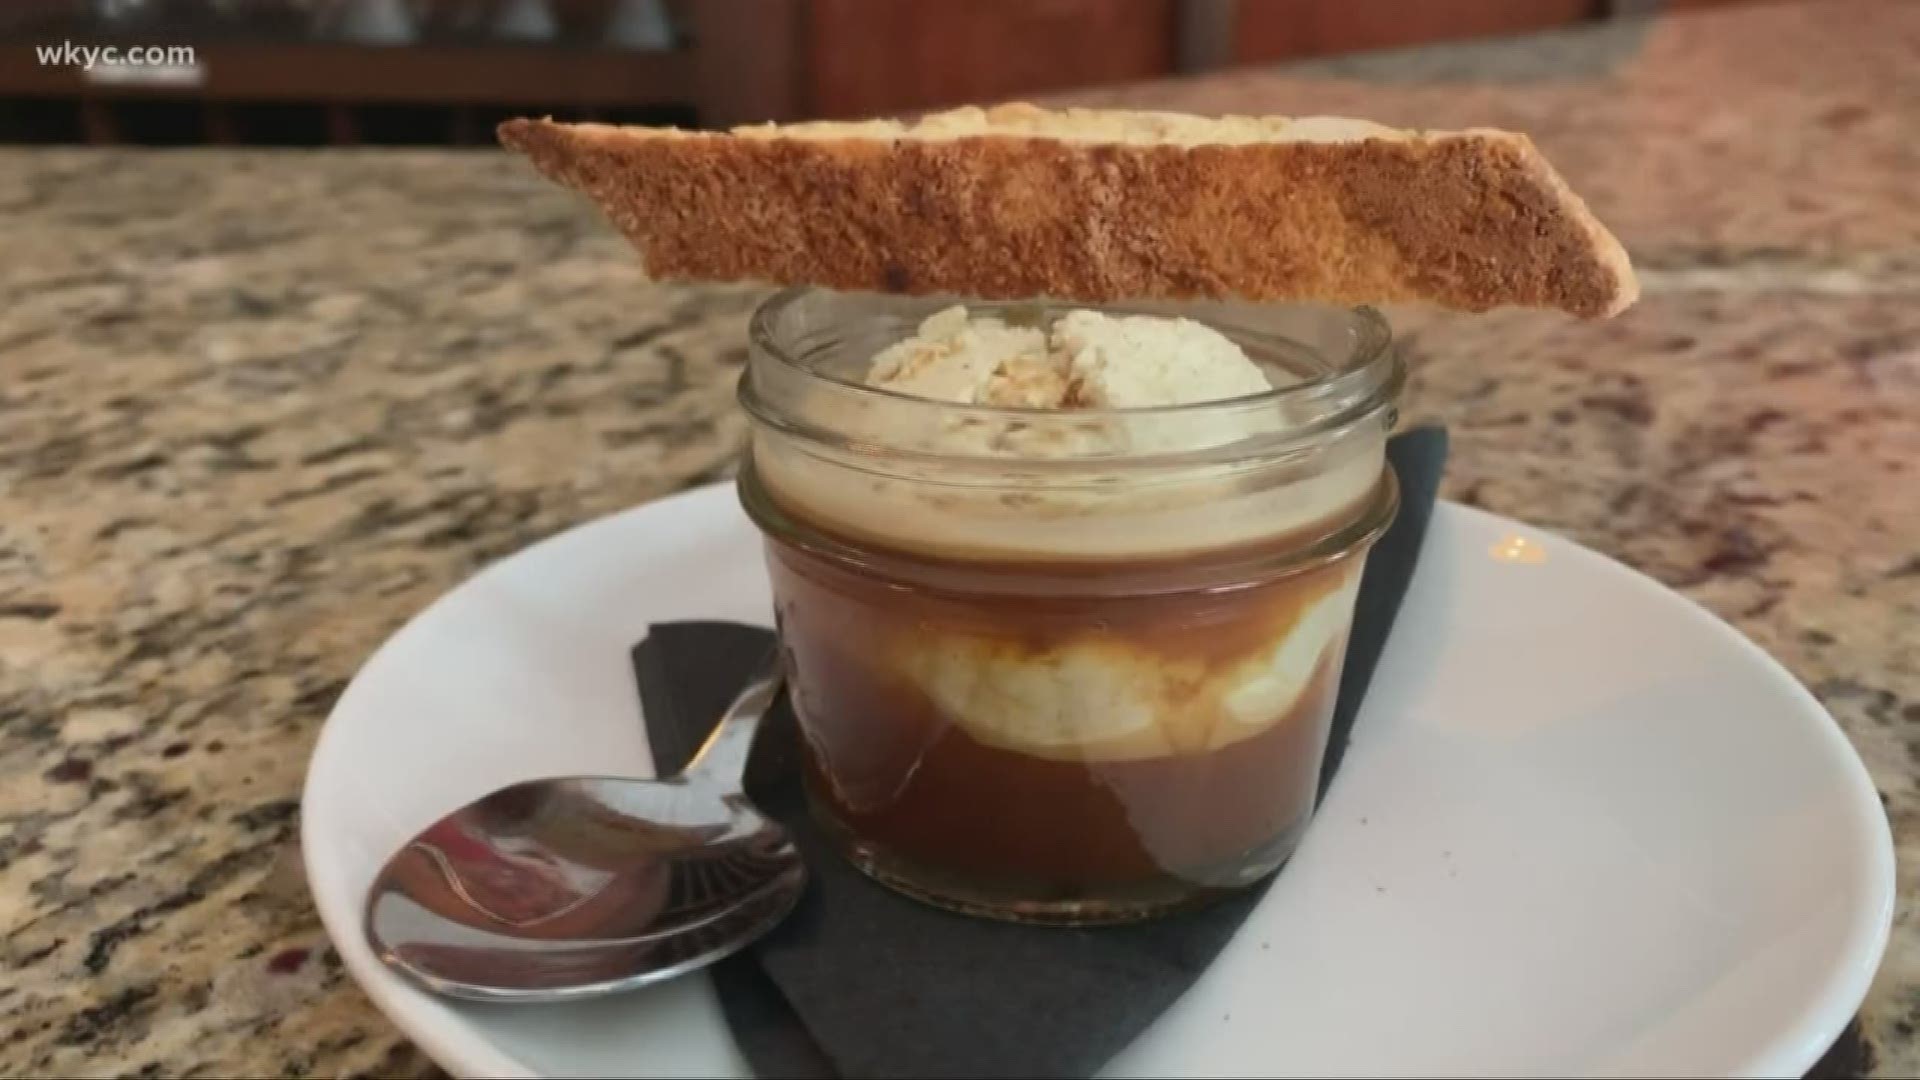 Looking for the perfect place to eat with your special someone this Valentine's Day? 3News' Austin Love takes us to three of the best places you can try.